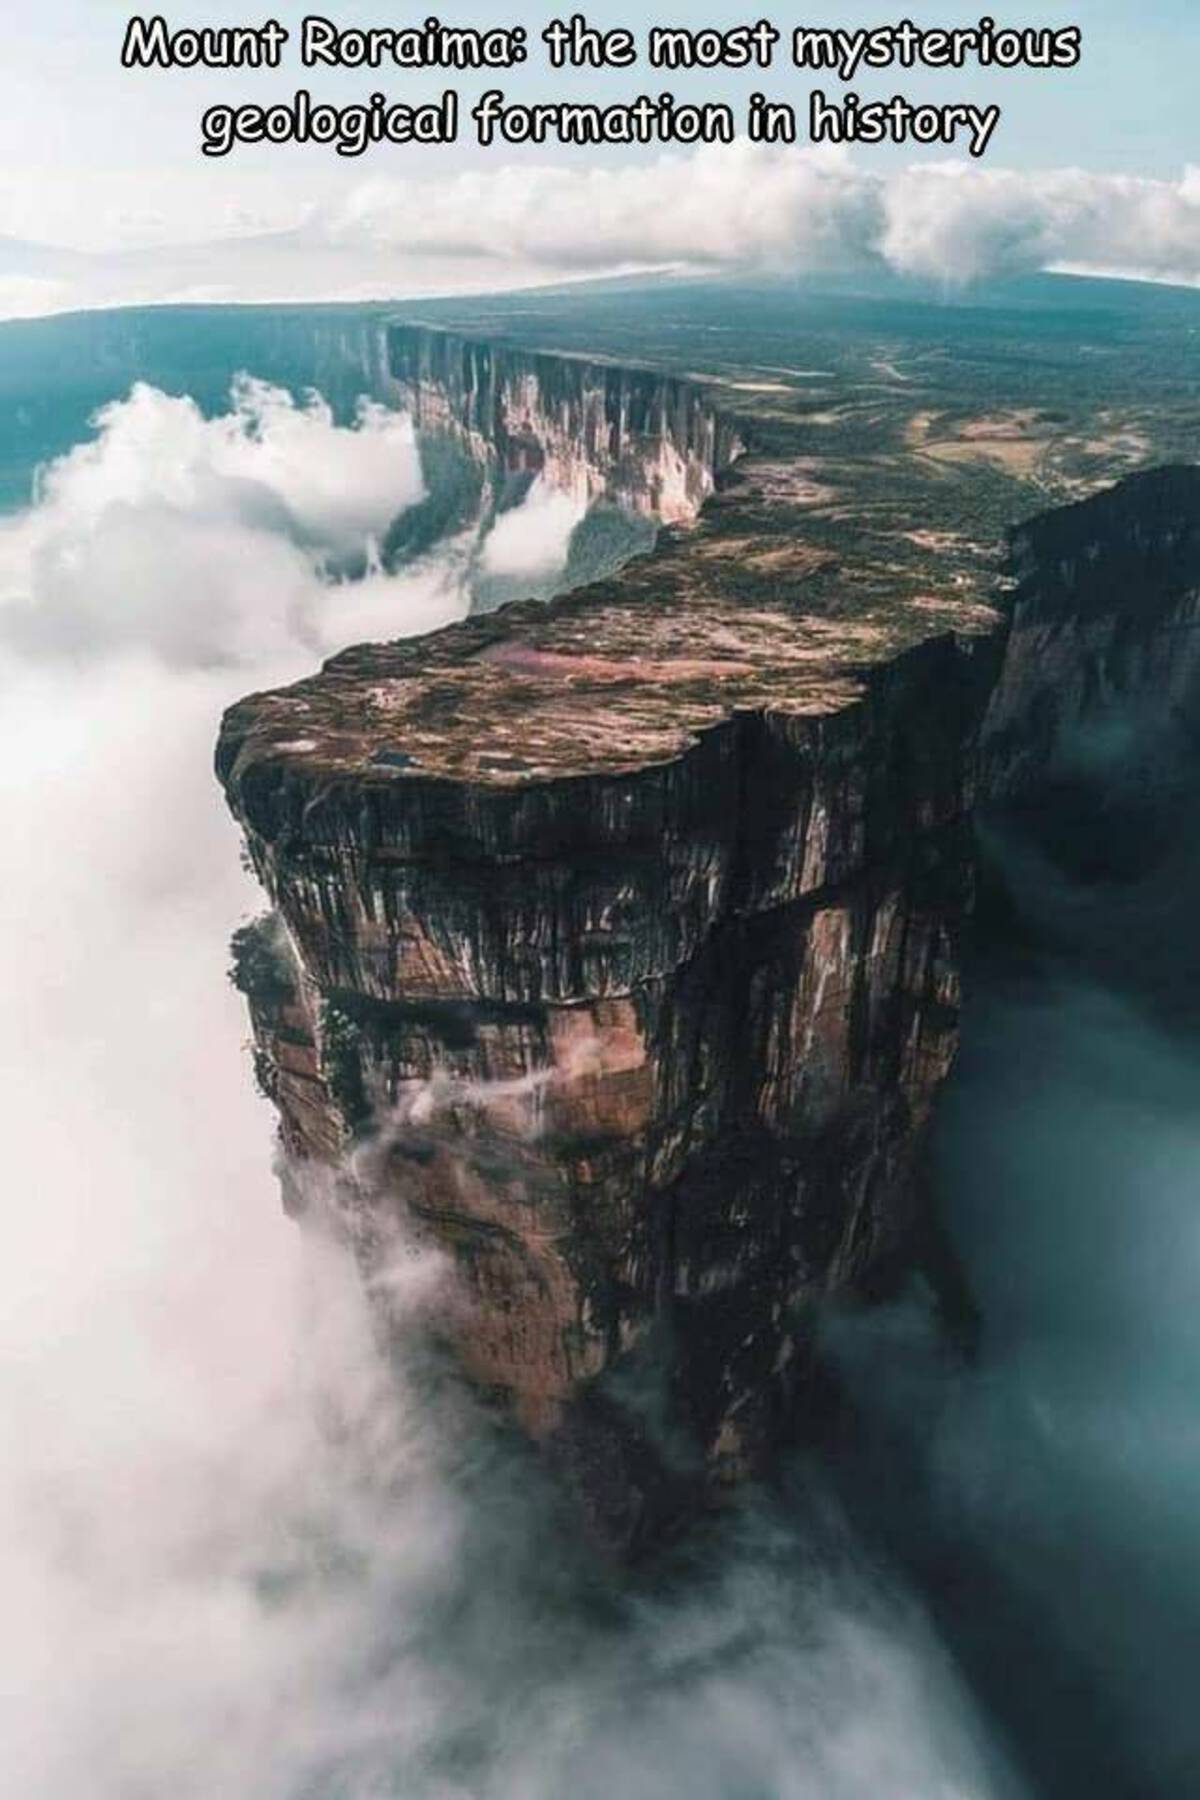 cliff - Mount Roraima the most mysterious geological formation in history